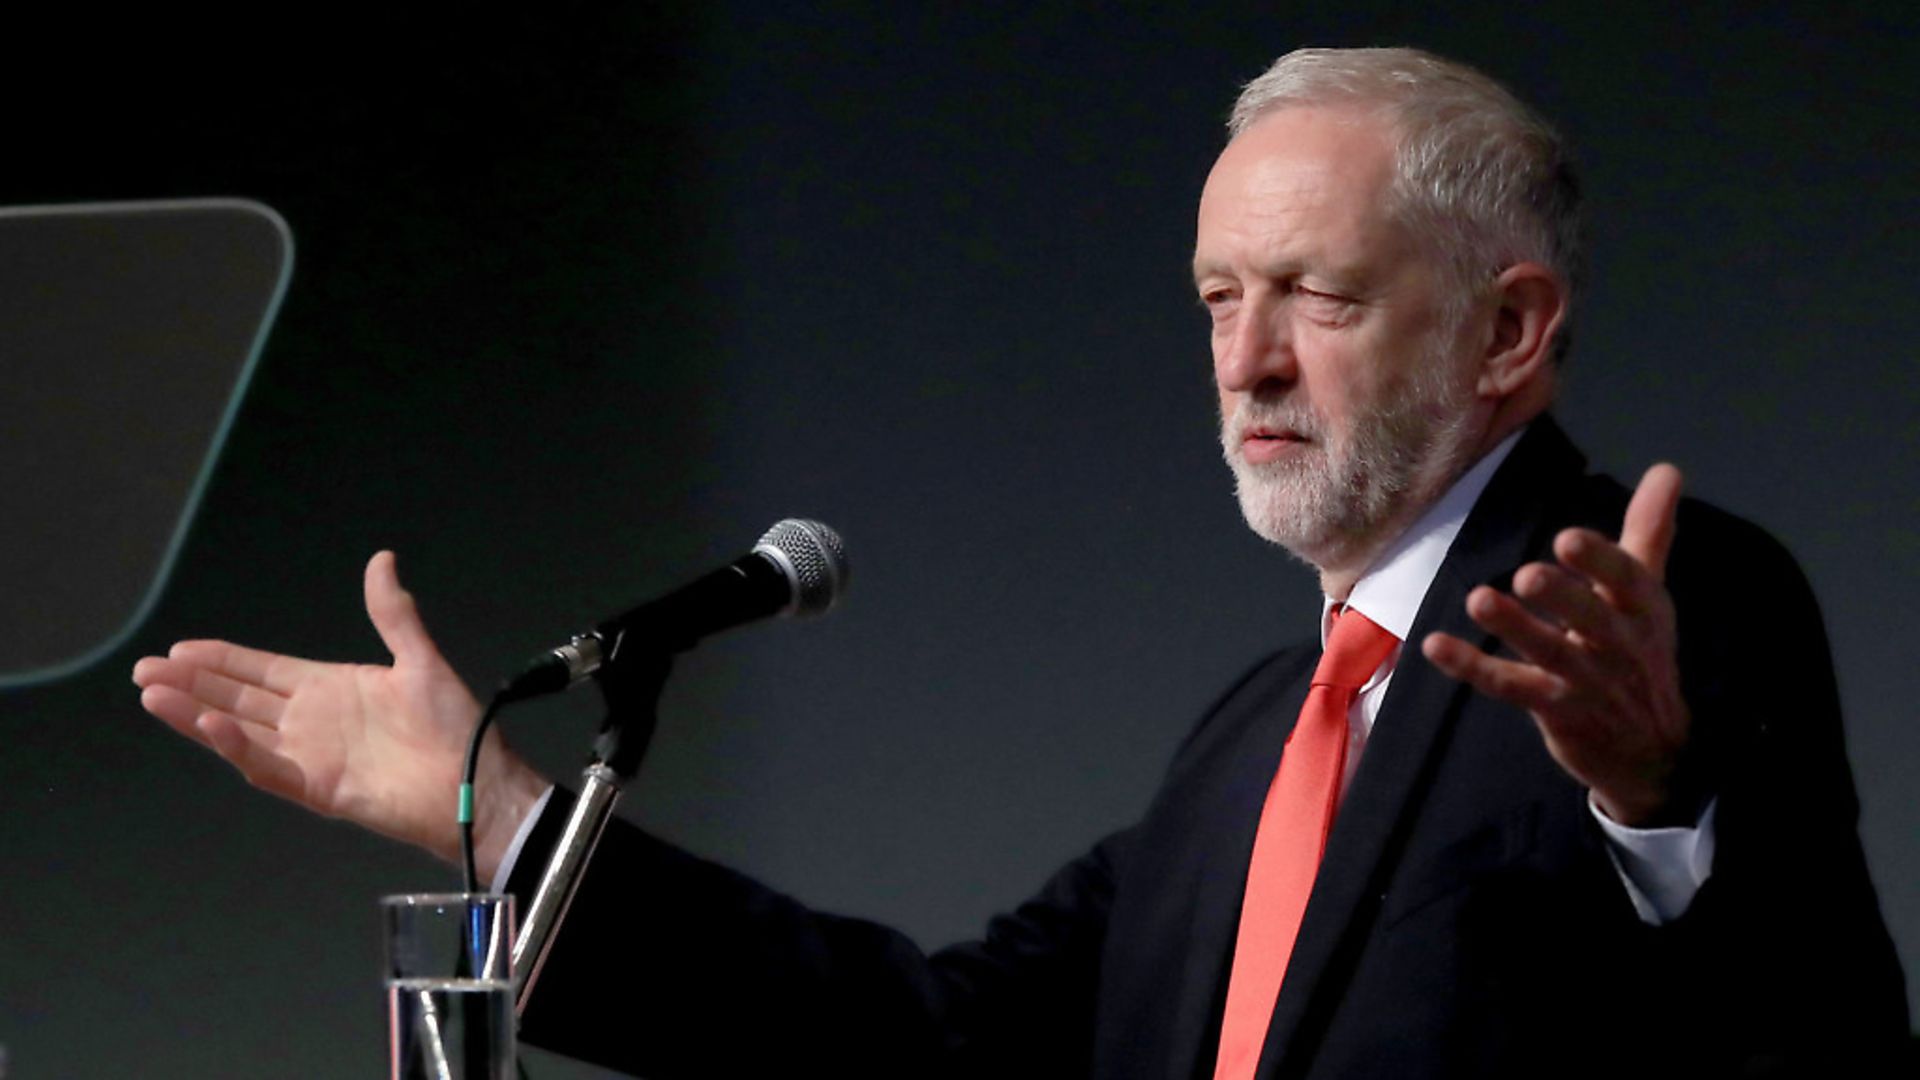 Labour leader Jeremy Corbyn who will today outline the 'benefit' of Brexit
Photo: PA / Peter Byrne - Credit: PA Wire/PA Images